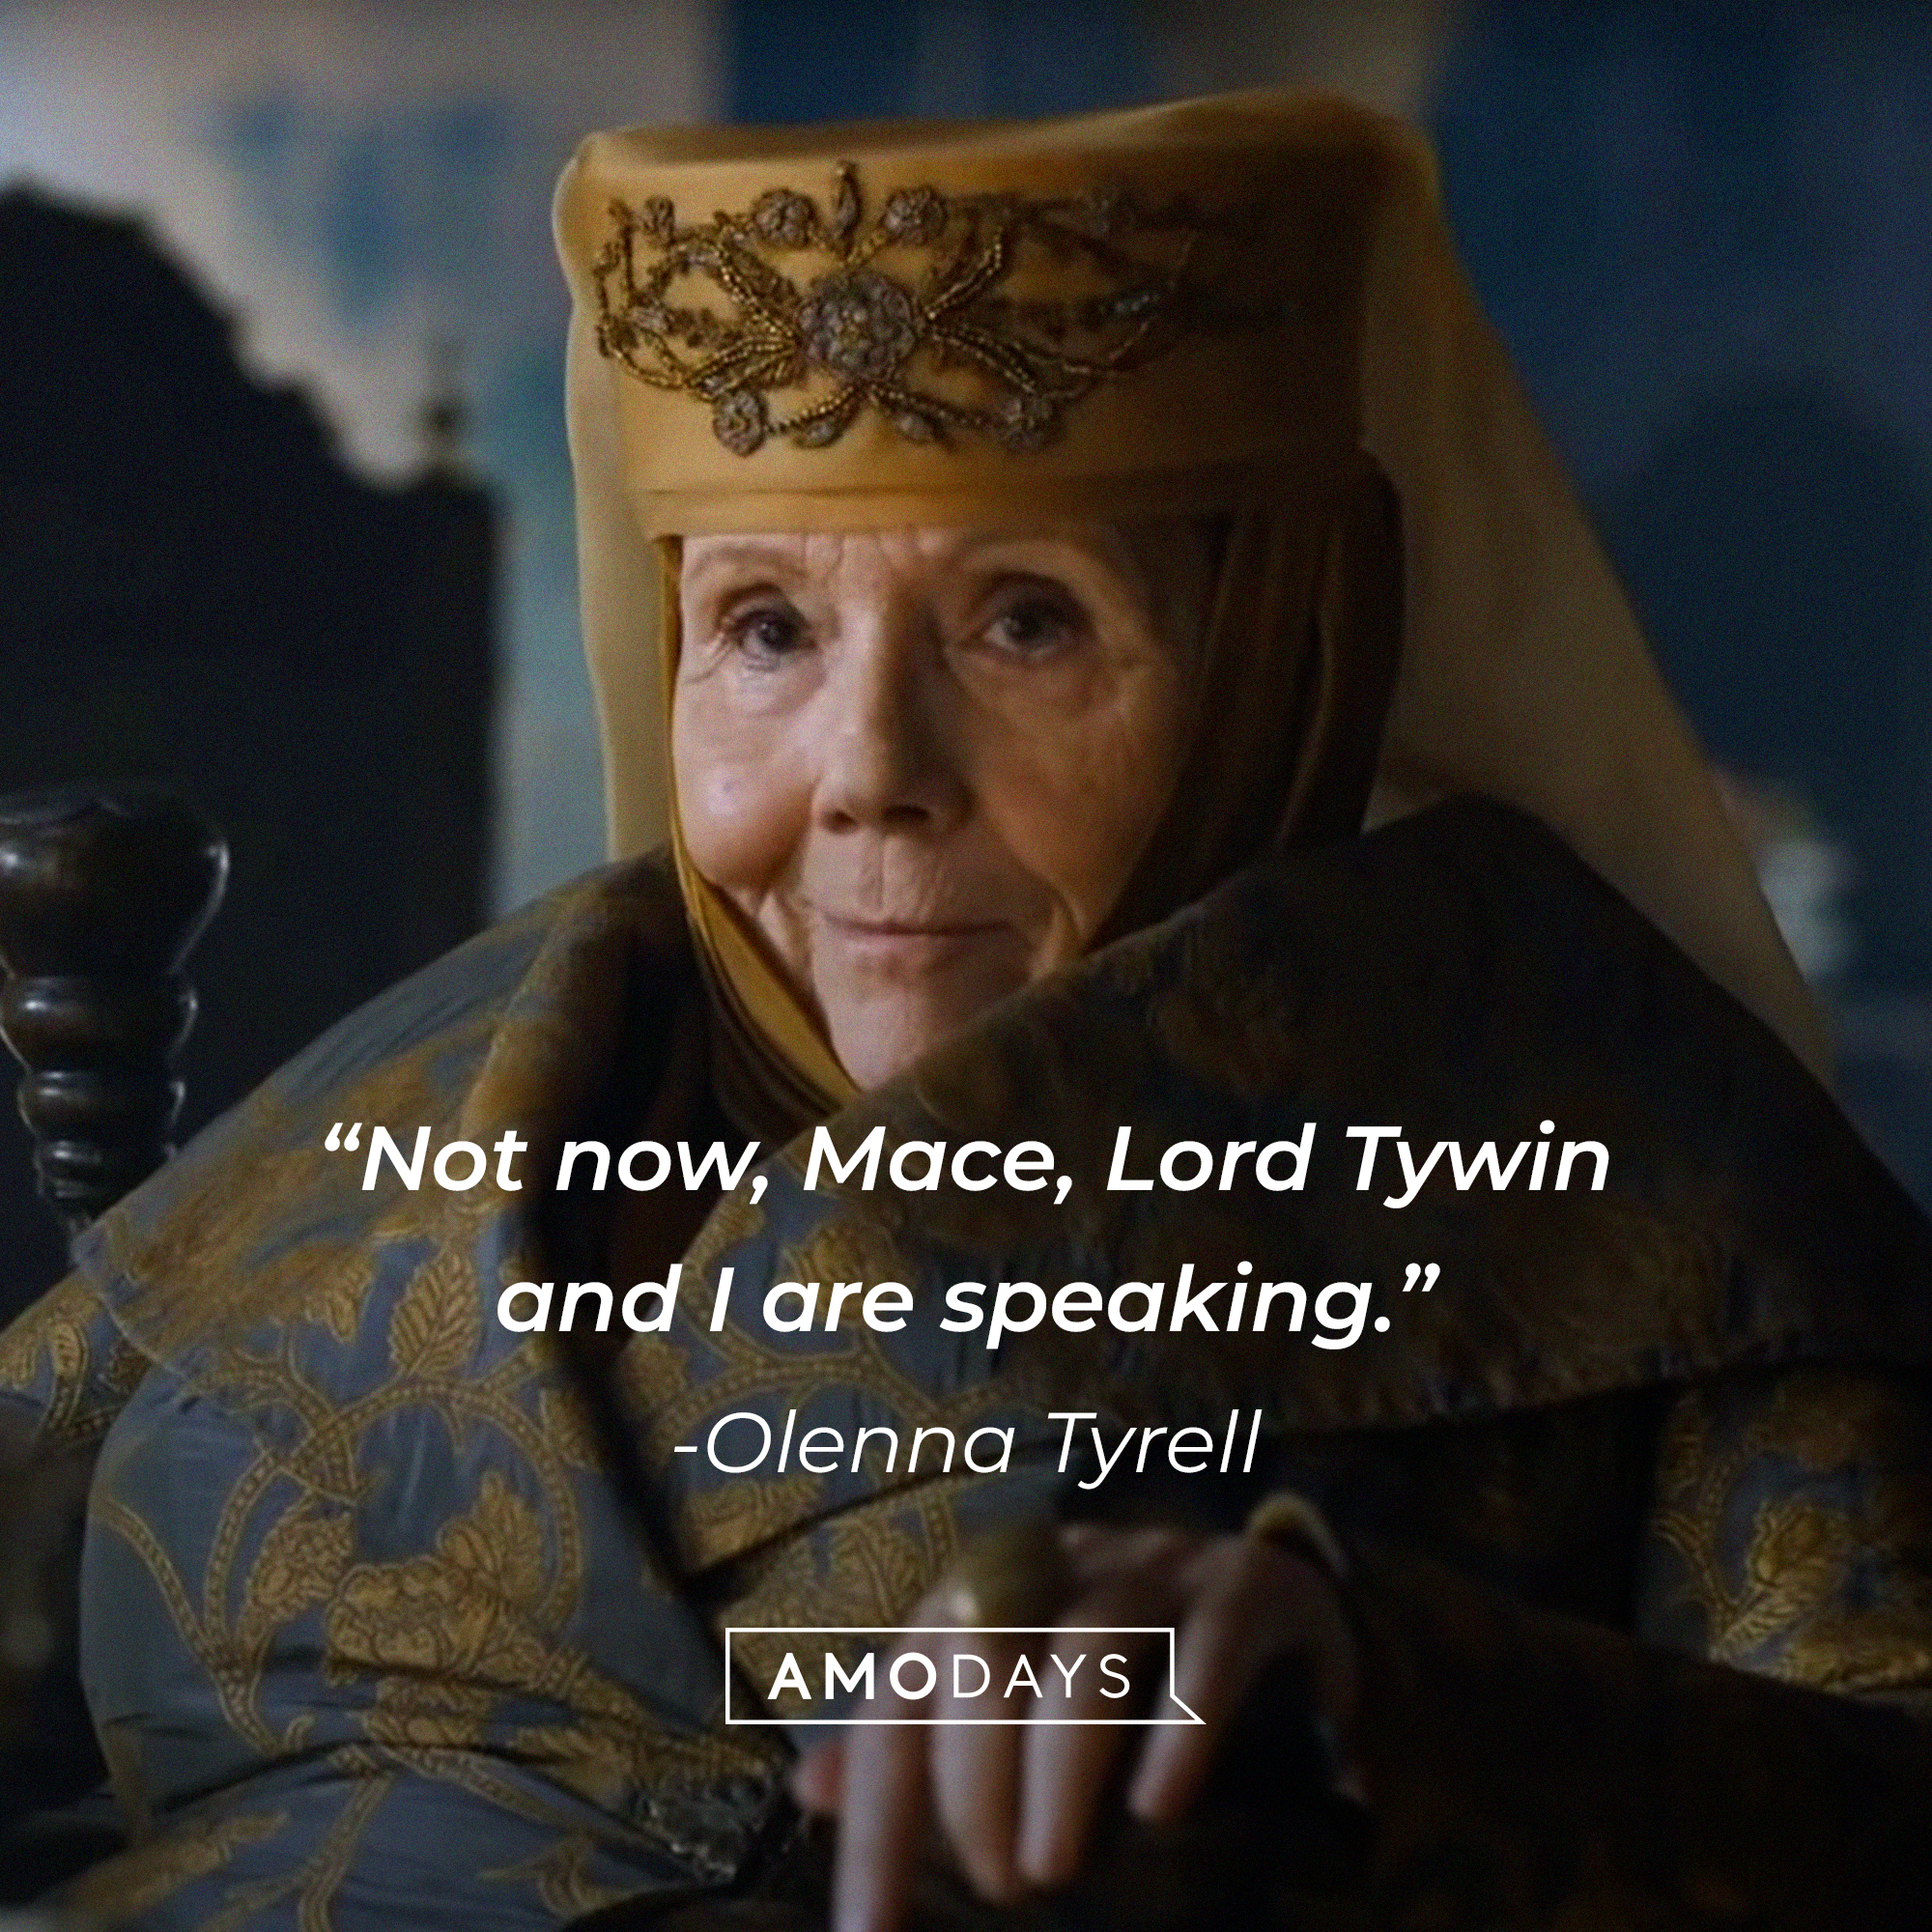 Olenna Tyrell, with her quote: "Not now, Mace, Lord Tywin and I are speaking." │Source: facebook.com/GameOfThrones